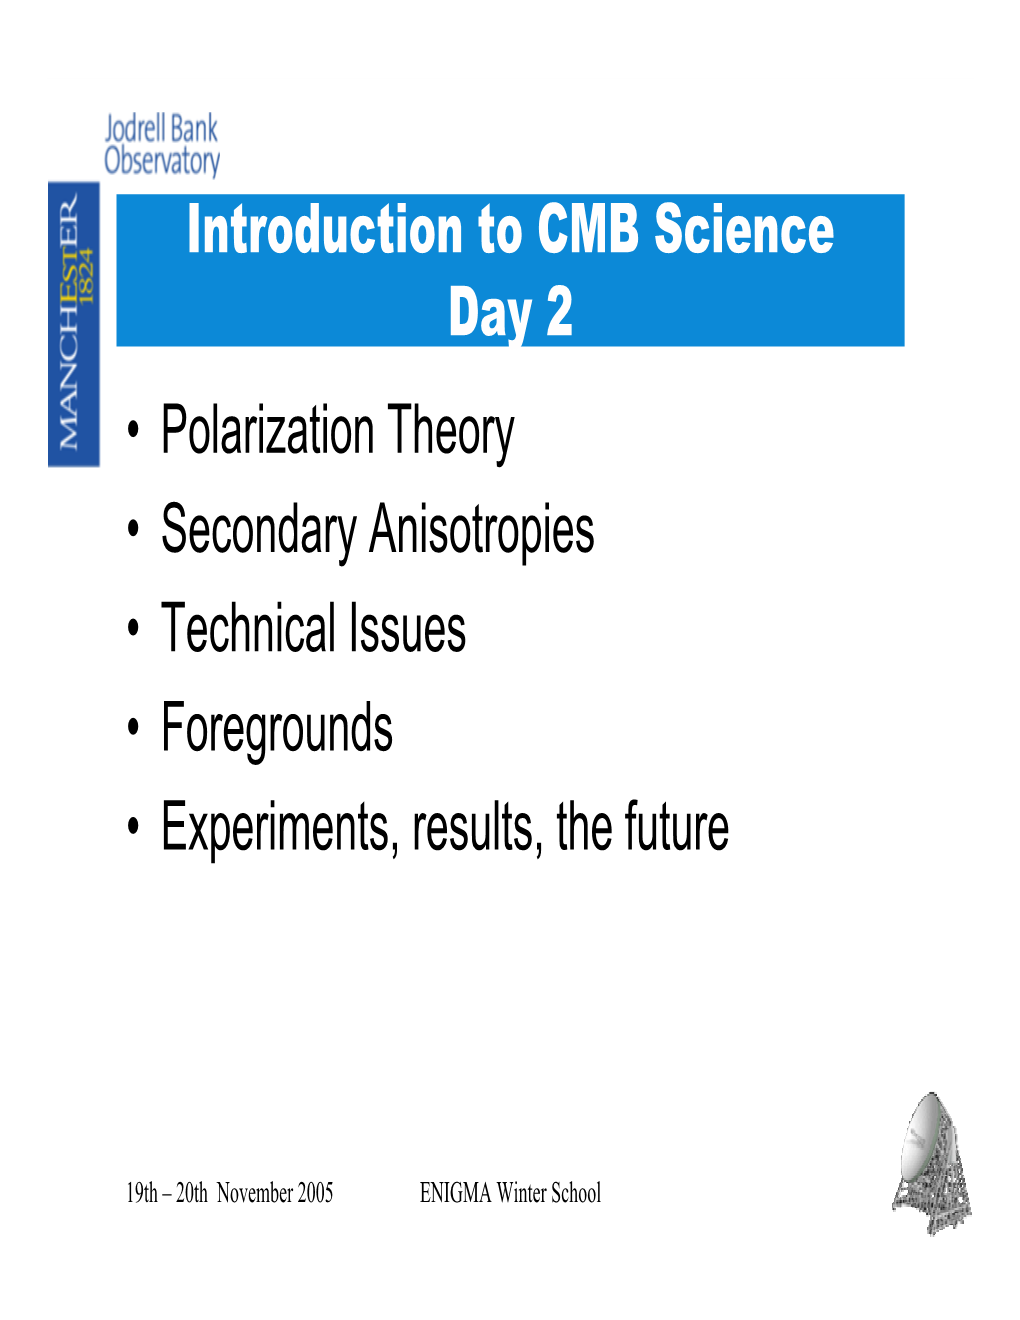 Introduction to CMB Science Day 2 • Polarization Theory • Secondary Anisotropies • Technical Issues • Foregrounds • Experiments, Results, the Future